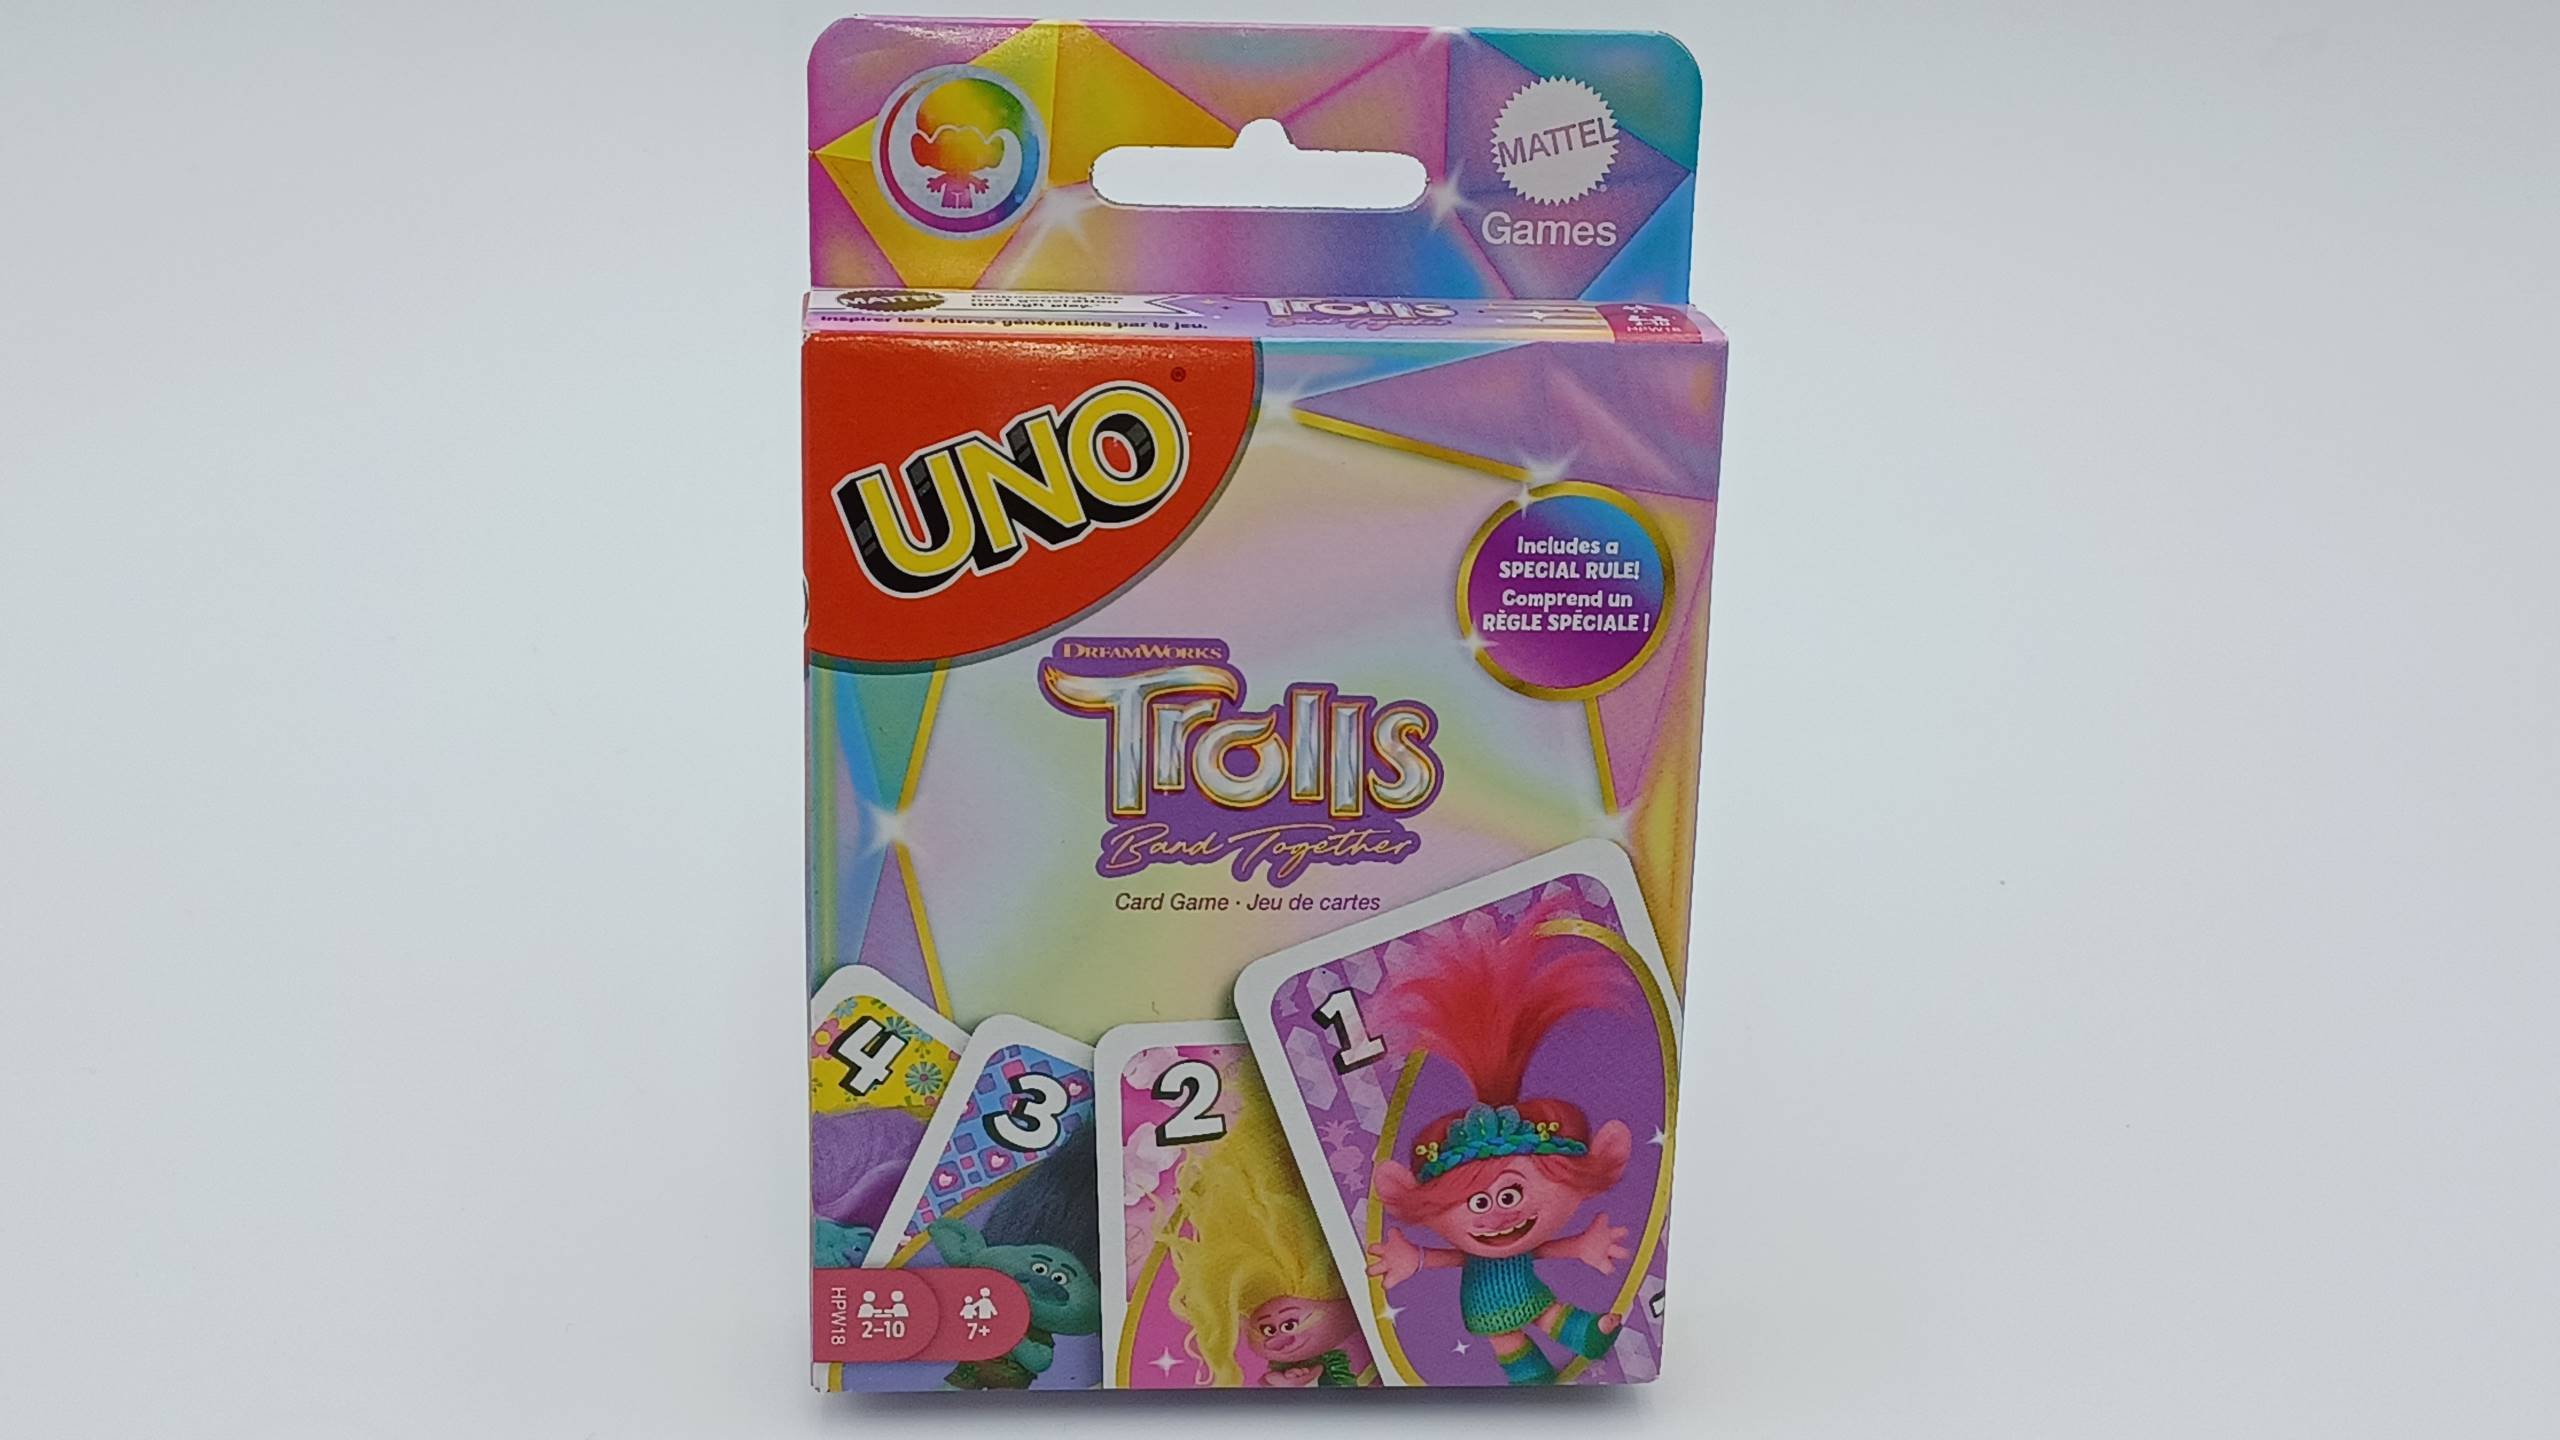 Box for UNO Trolls Band Together